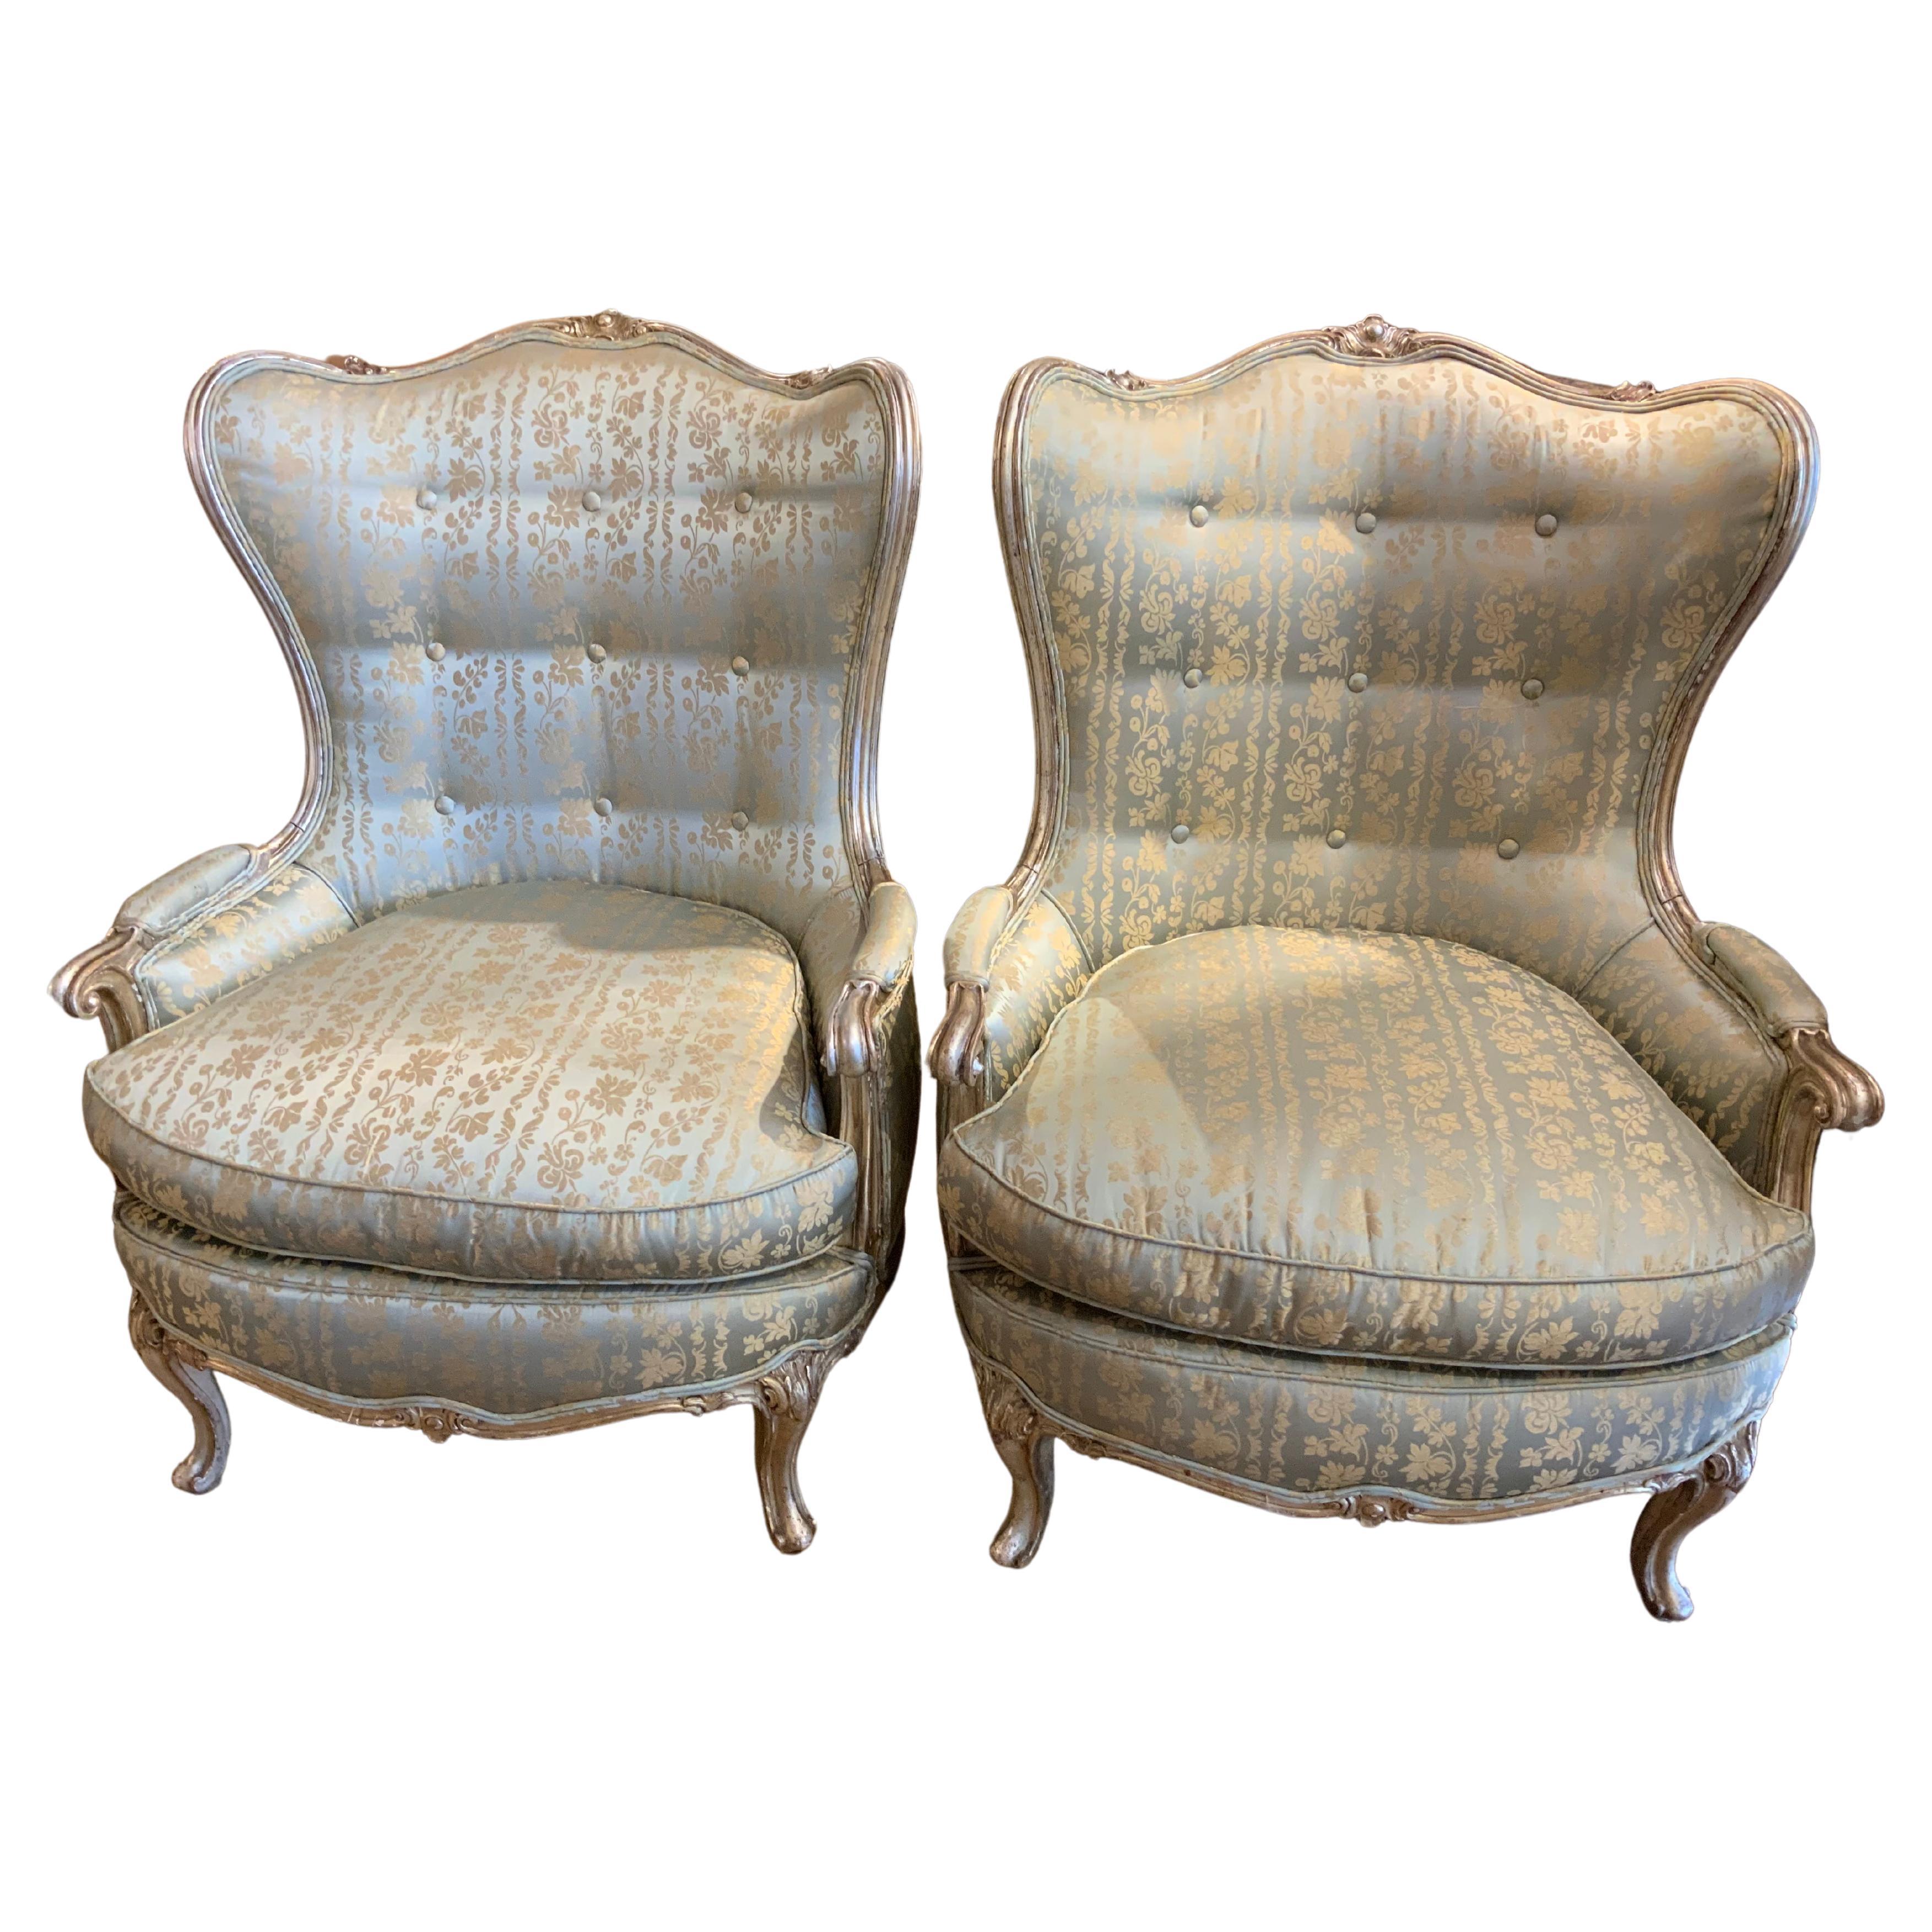 Pair of Silver Gilt Bergeres in Silk Fabric, Louis XV-Style